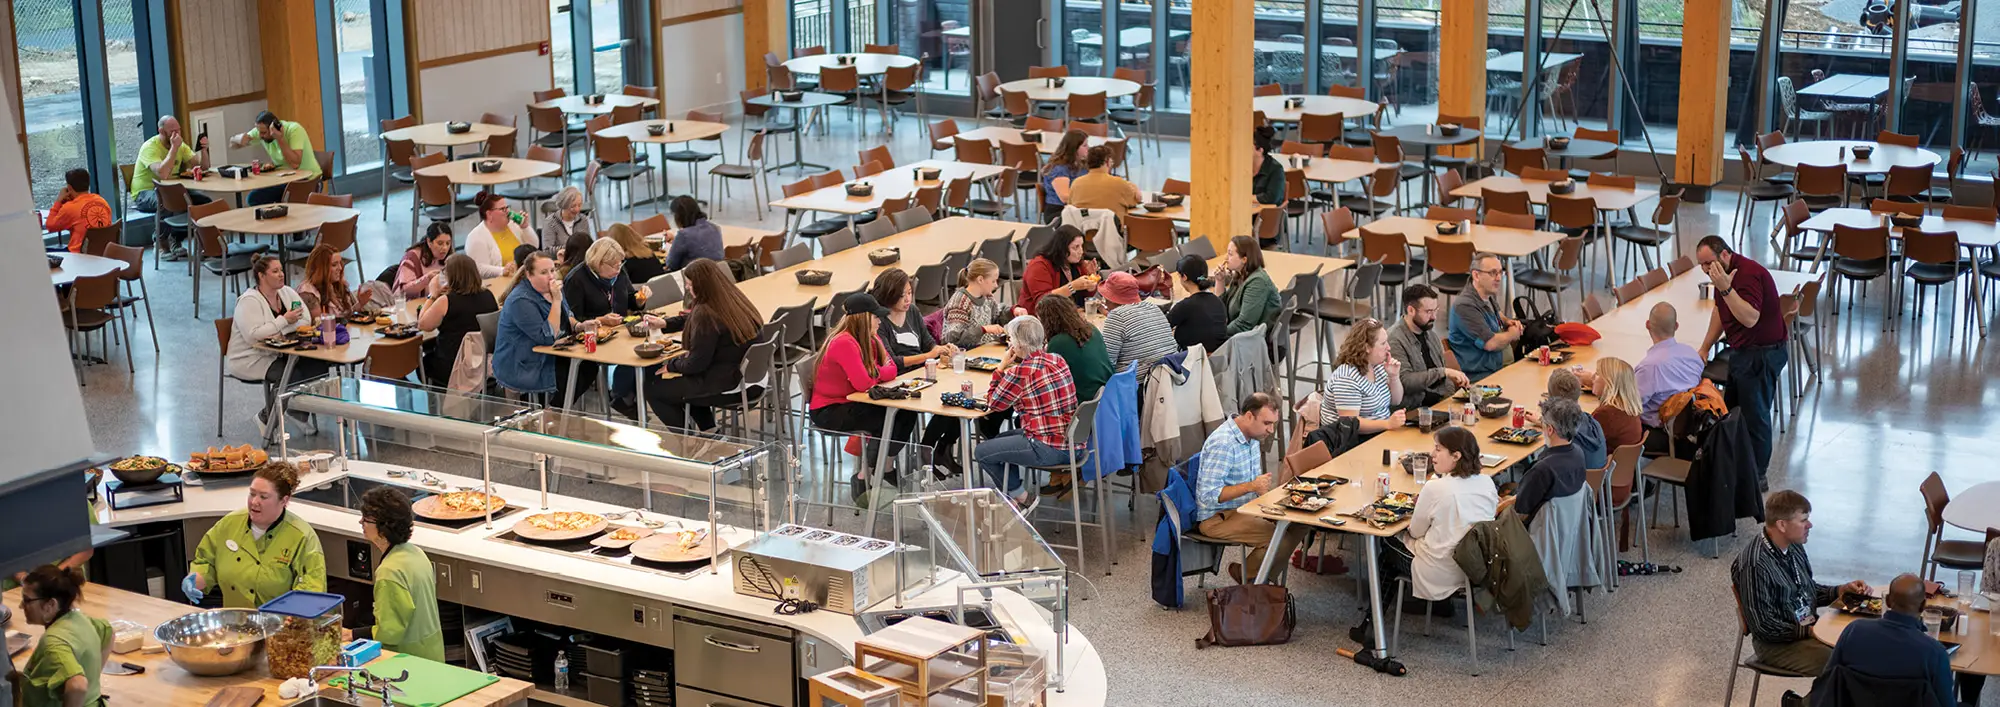 Overhead view of dining room area with faculty and students dining